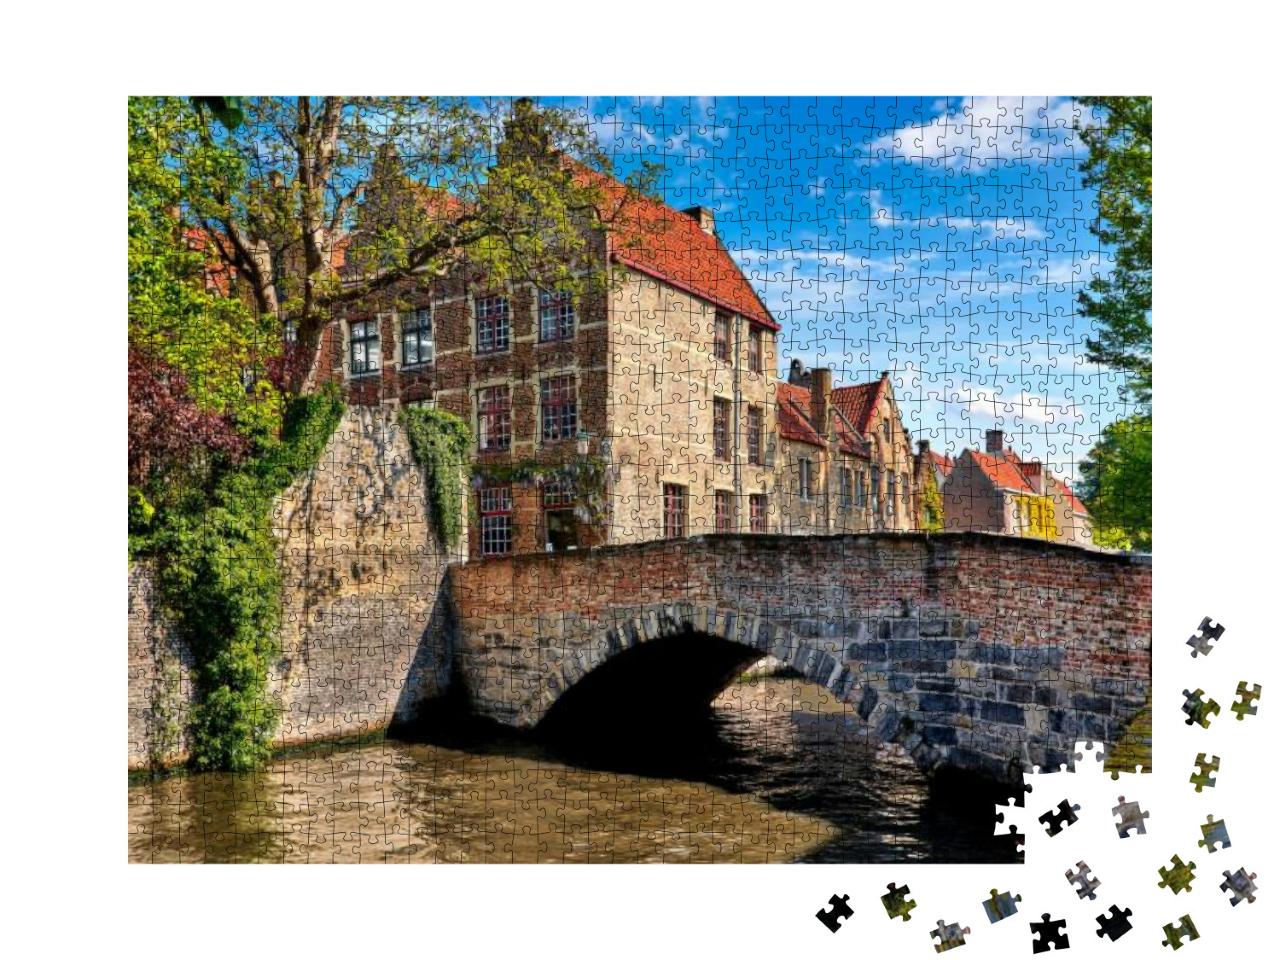 Bruges Belgium Vintage Stone Houses & Bridge Over Canal A... Jigsaw Puzzle with 1000 pieces